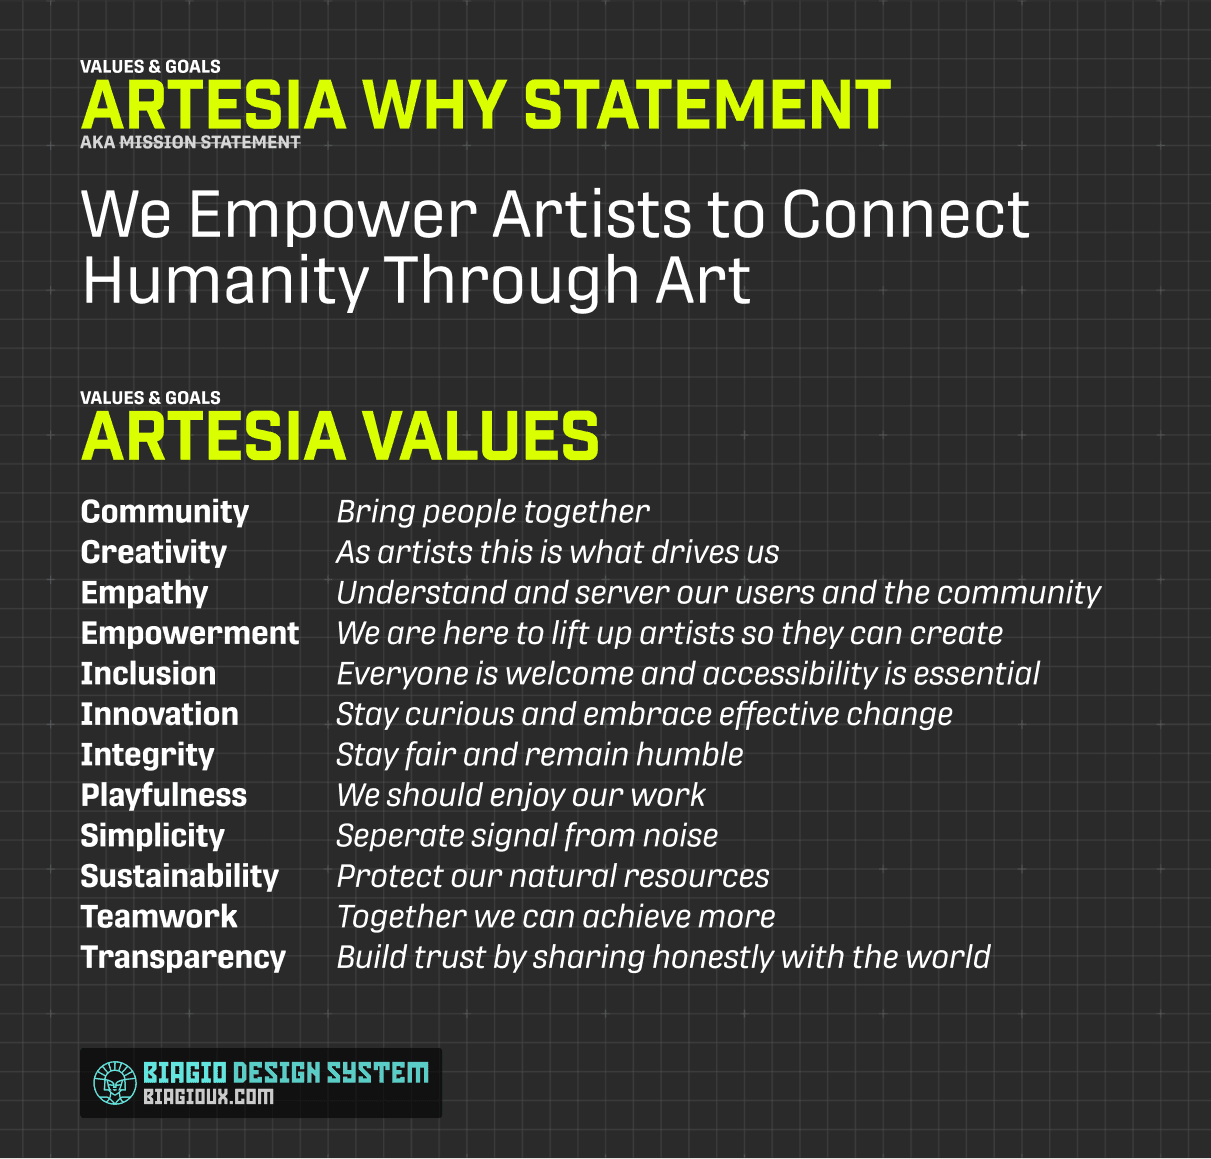 List of Artesia 'Why Statement' and 'Artesia values'